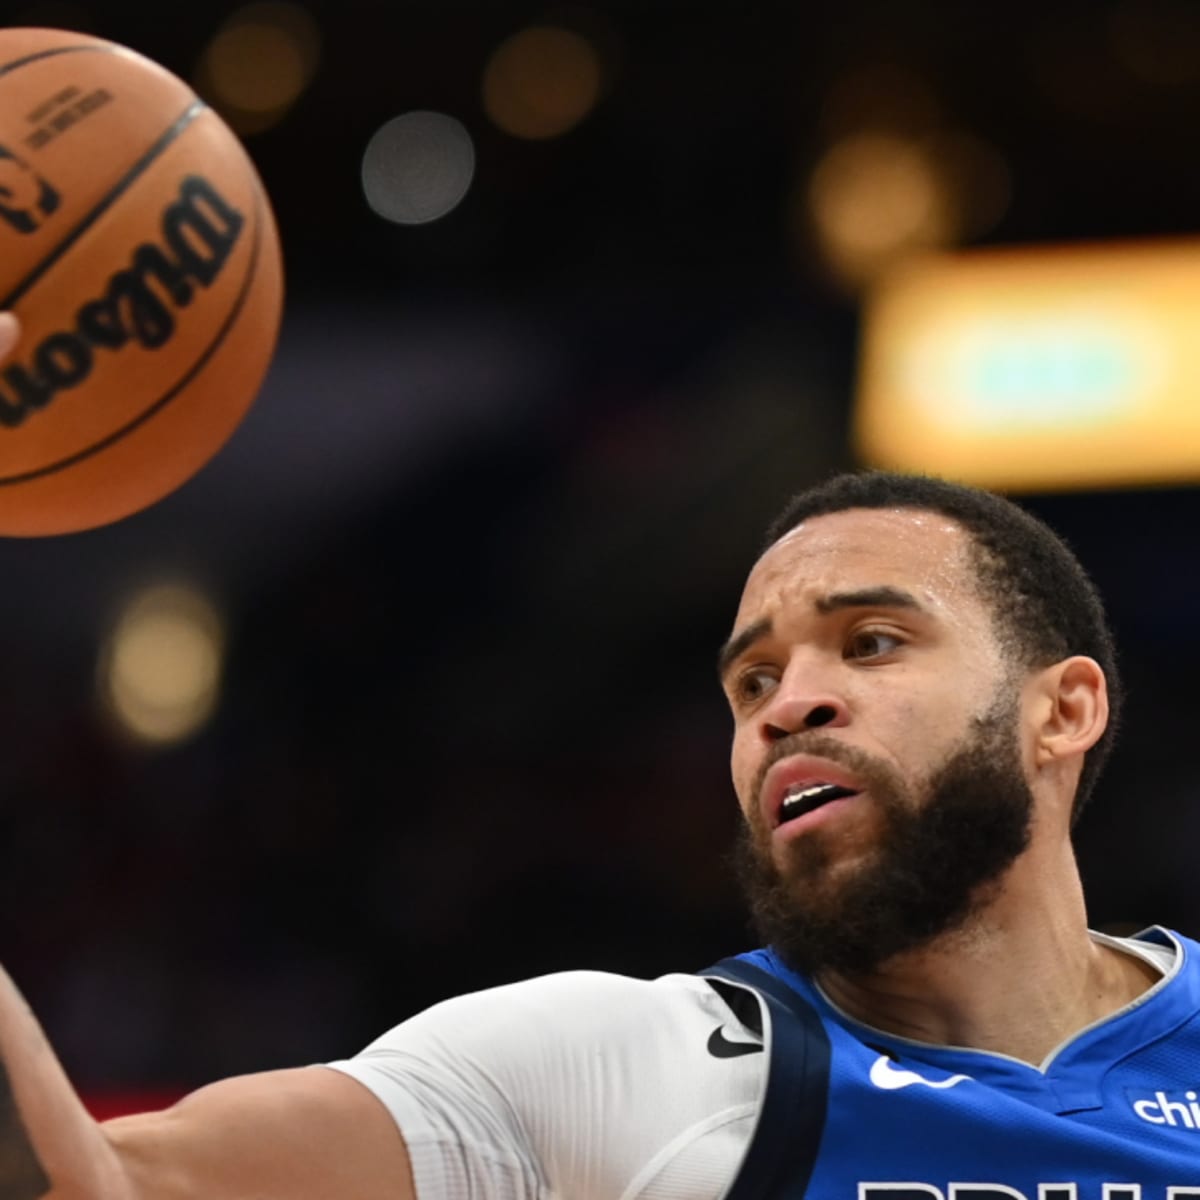 Are Nets in talks with Cavaliers about JaVale McGee? Two reports